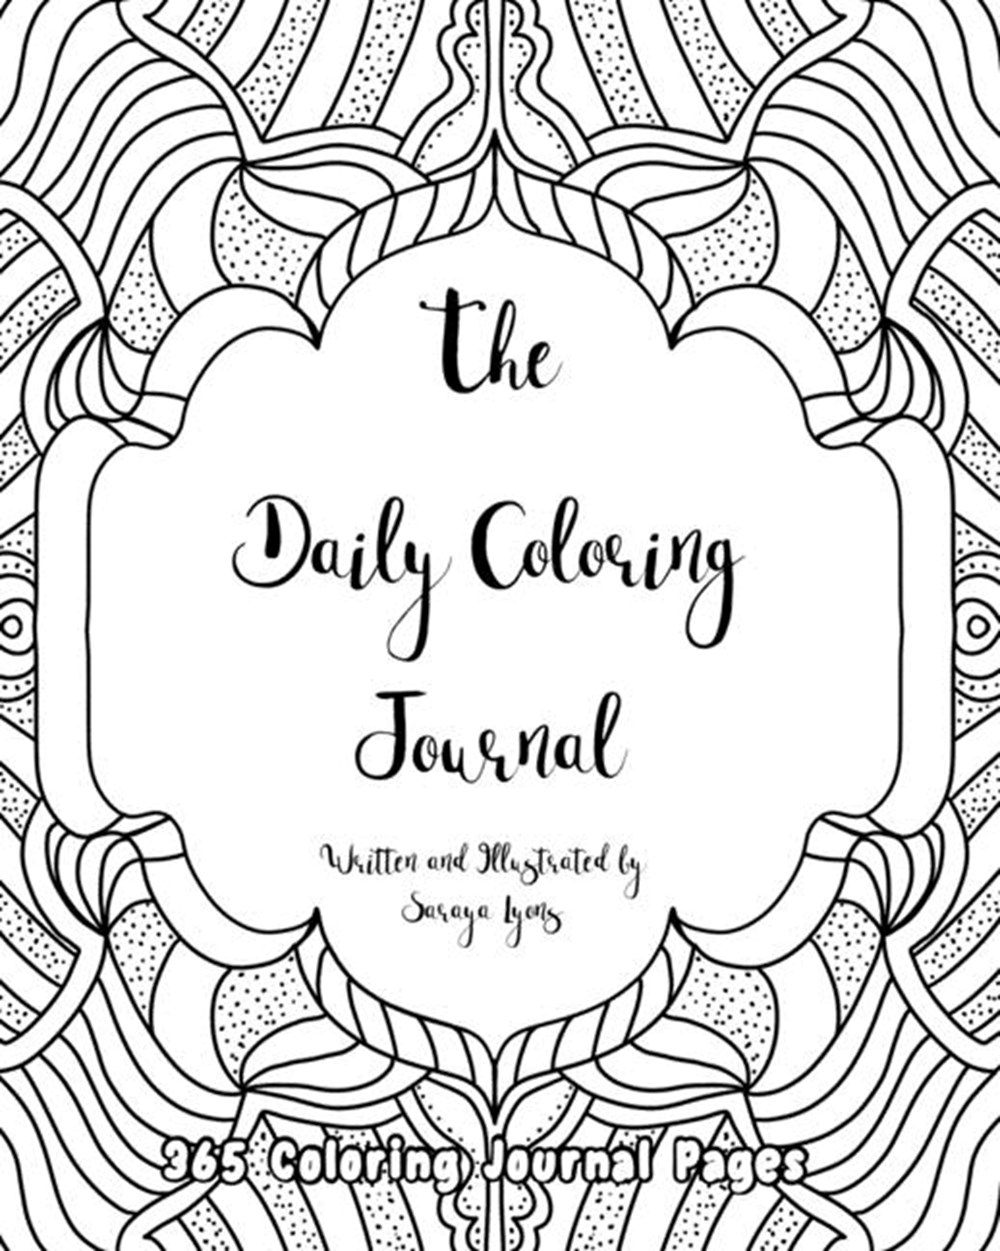 Daily Coloring Journal 365 Coloring Journal Pages